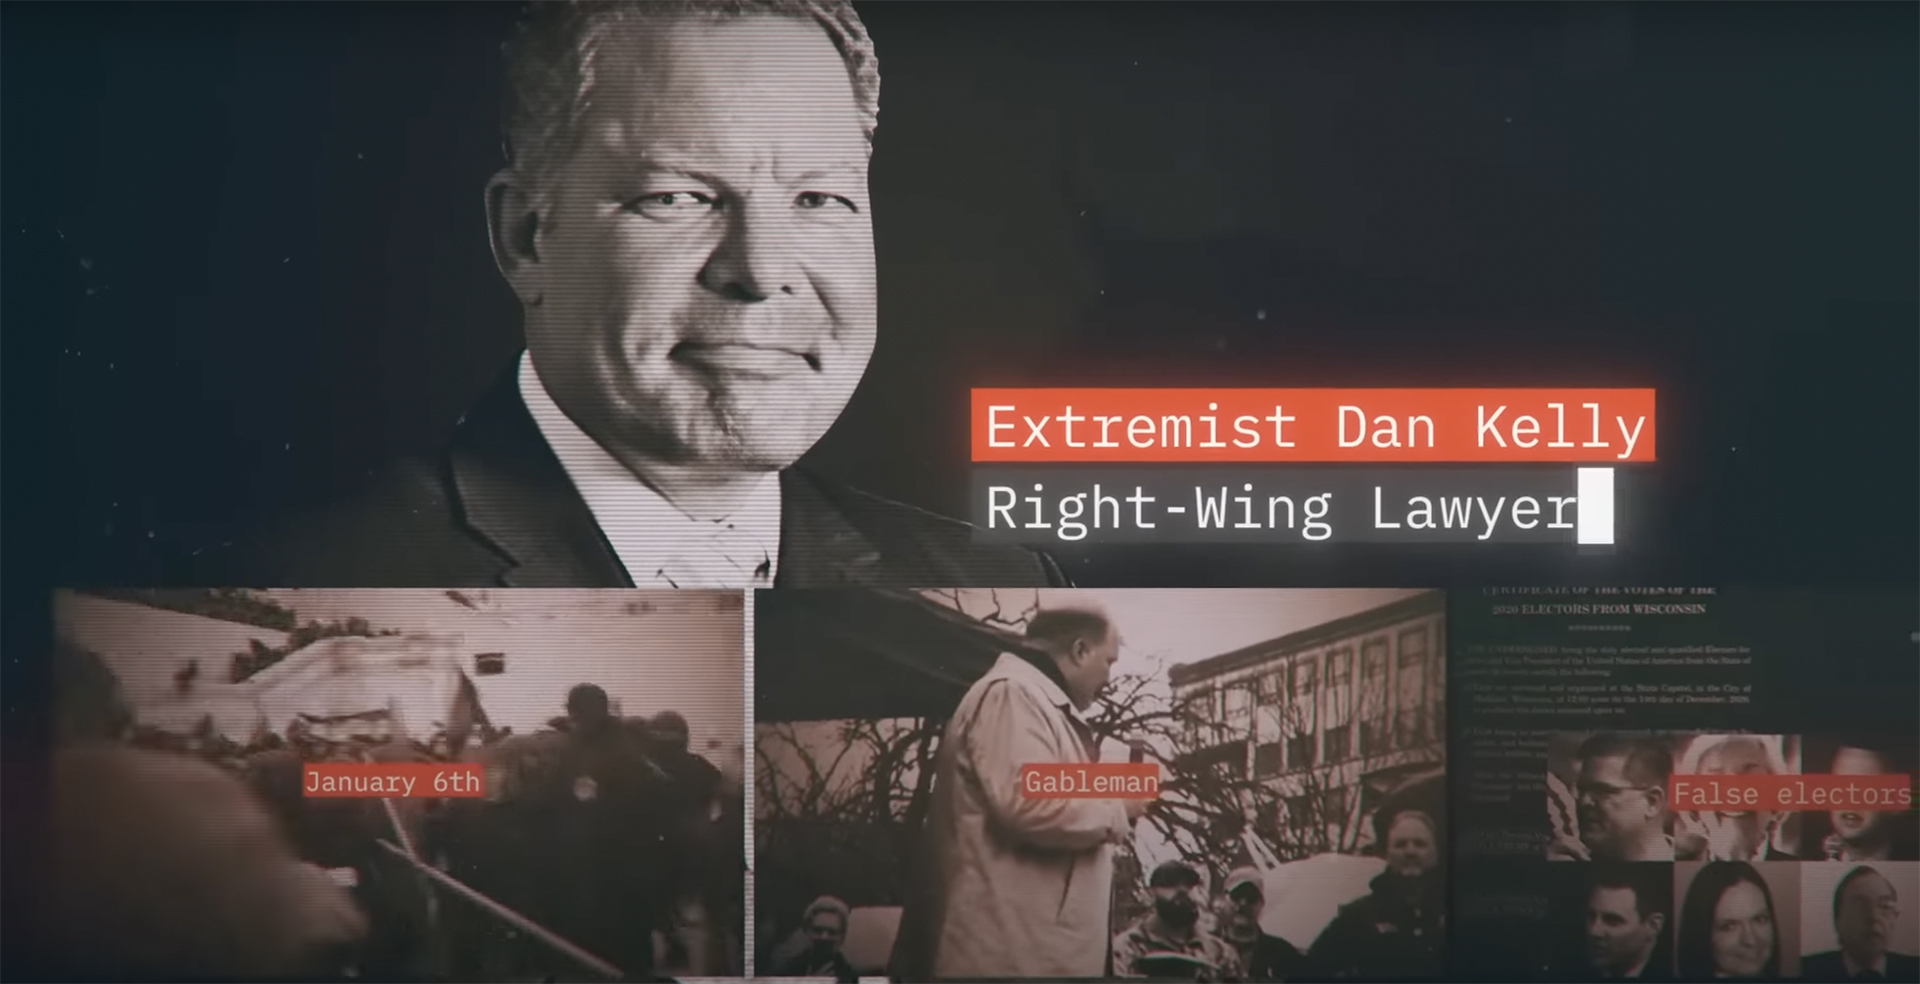 A still image from a video shows the face of Daniel Kelly, images of other people and the words "Extremist Dan Kelly" and "Right-Wing Lawyer."